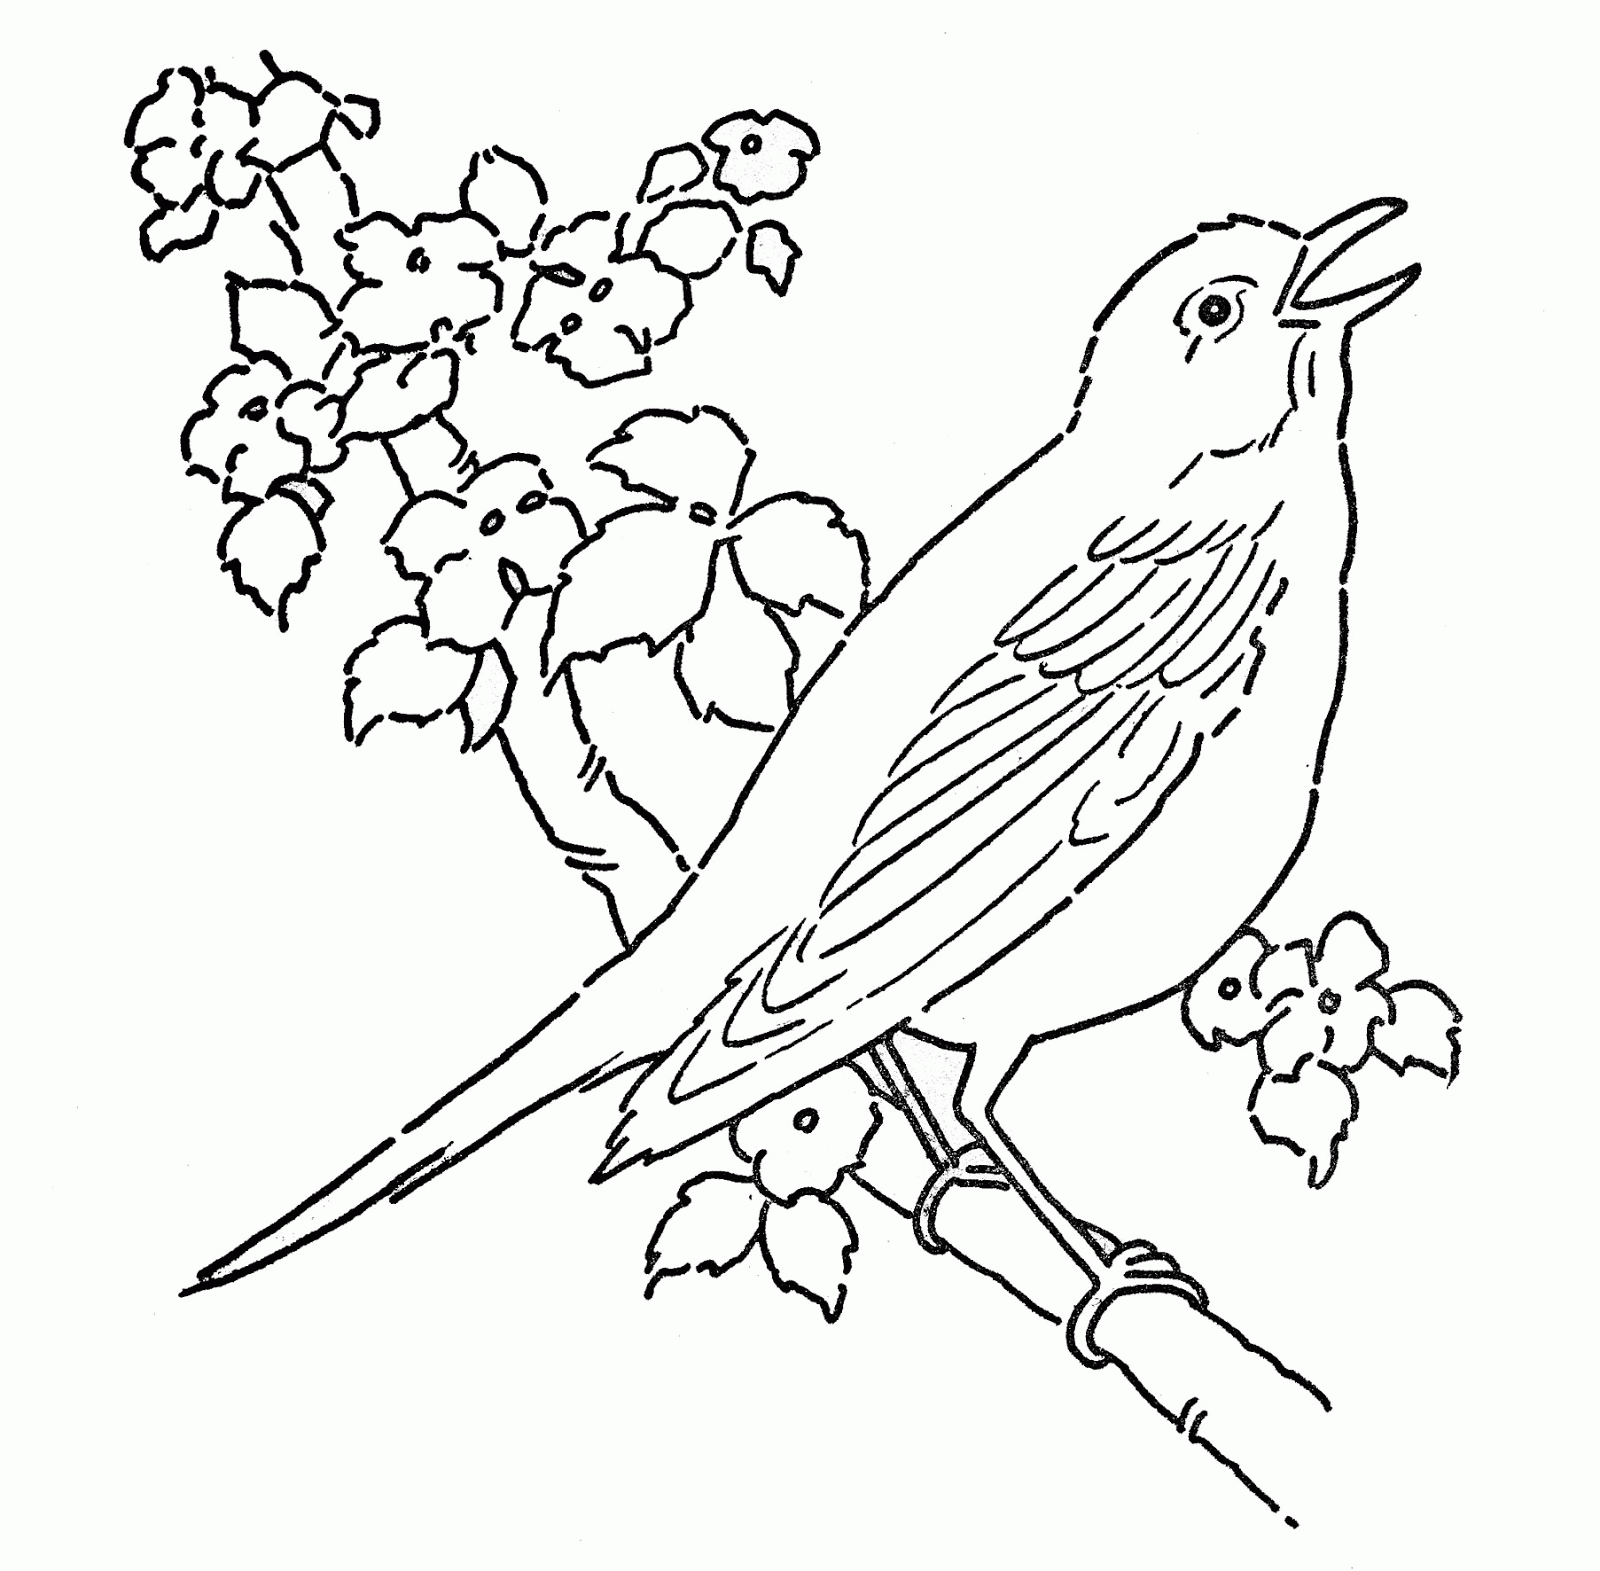 Line Art - Coloring Page - Bird with Blossoms - The Graphics Fairy